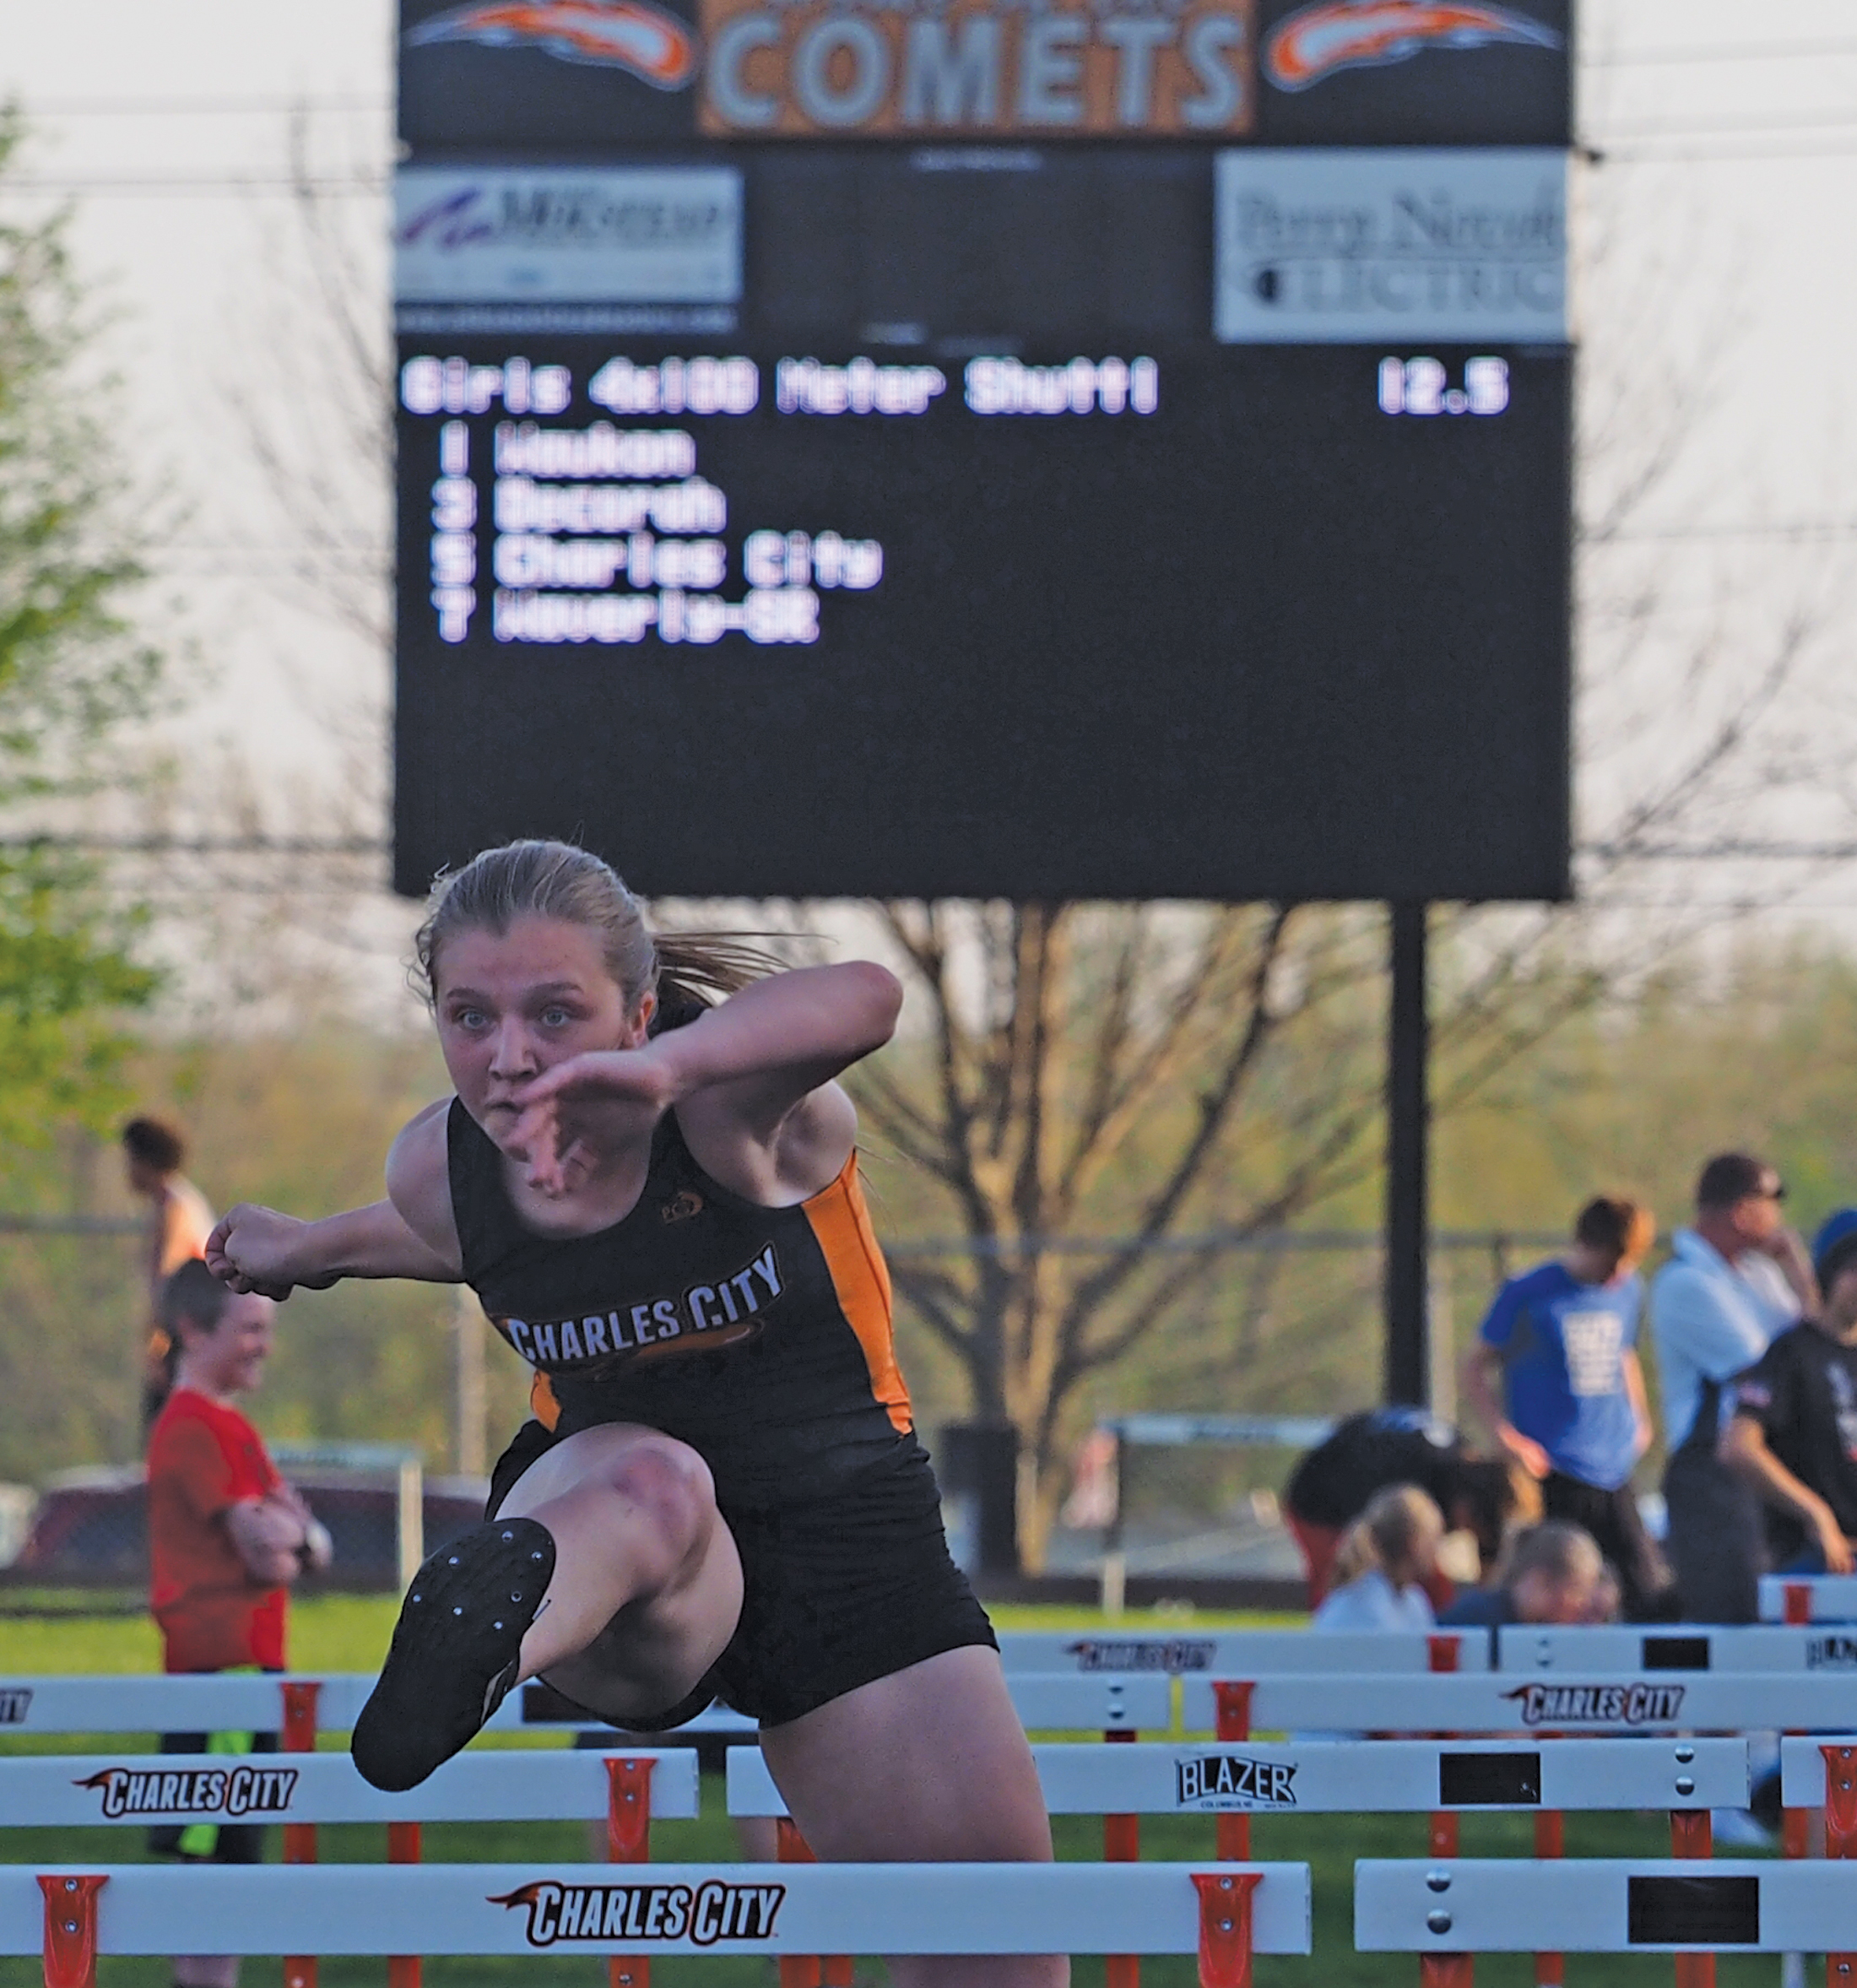 Records fall at Charles City-hosted NEIC Track Meet